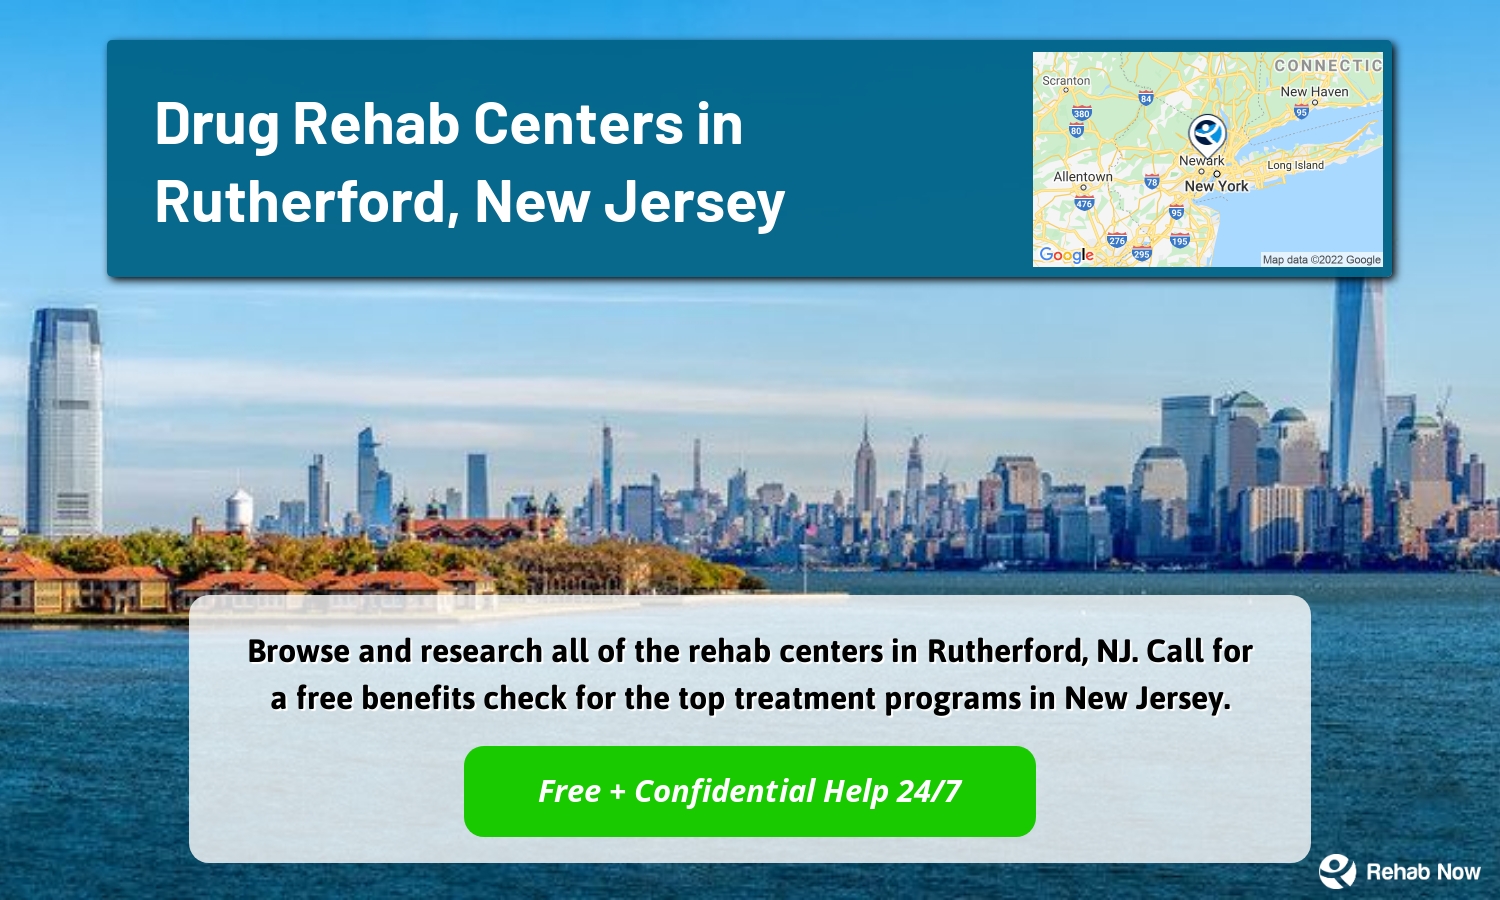 Browse and research all of the rehab centers in Rutherford, NJ. Call for a free benefits check for the top treatment programs in New Jersey.